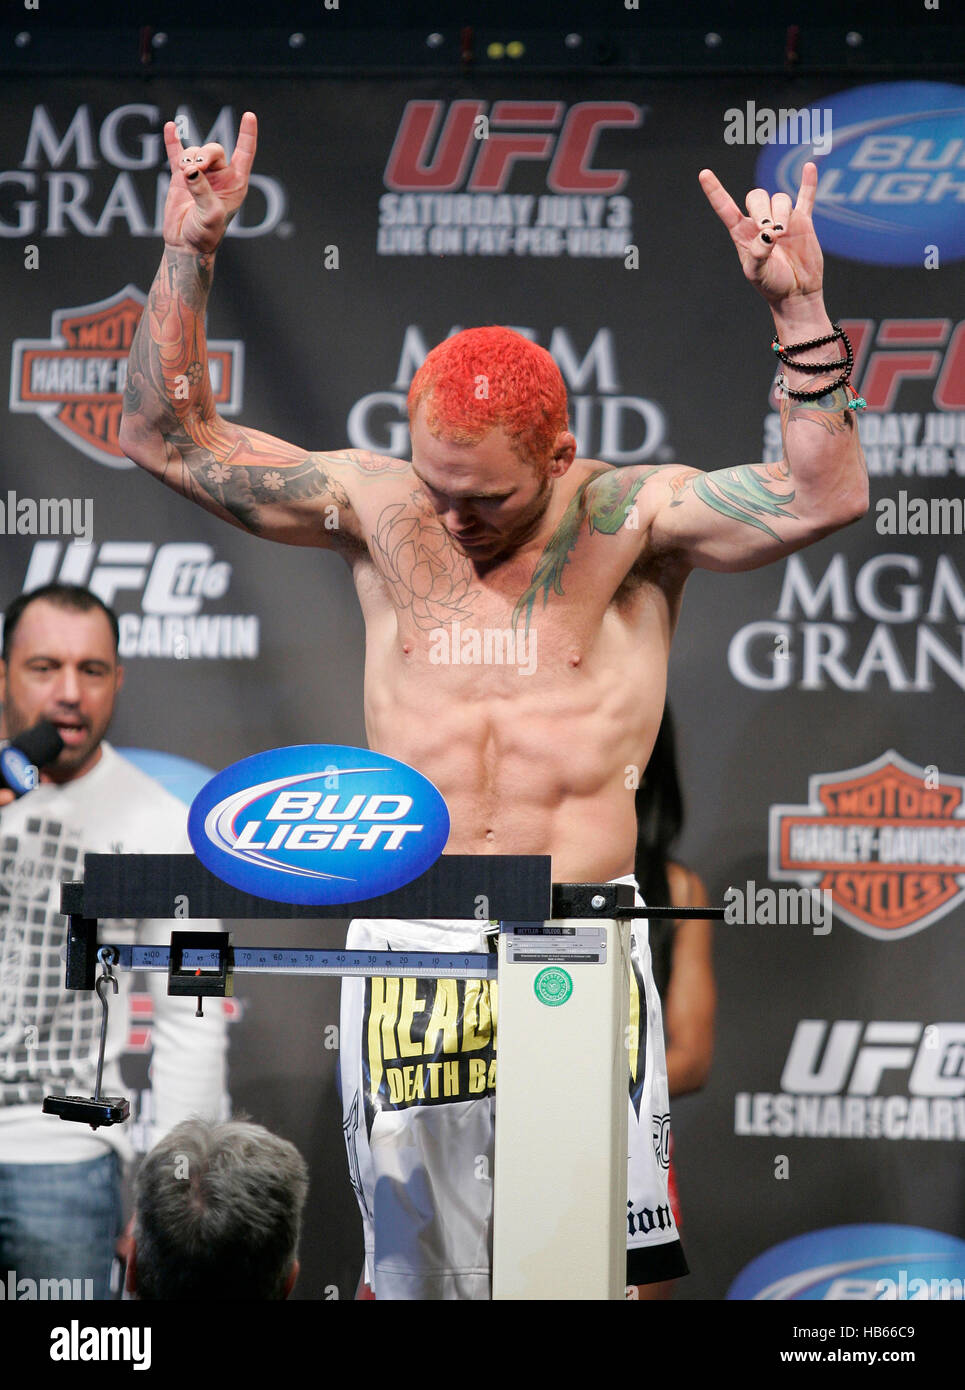 UFC fighter Chris Leben at the weigh ins for UFC 116 at the MGM Grand Arena on July 2, 2010, in Las Vegas, Nevada. Photo by Francis Specker Stock Photo